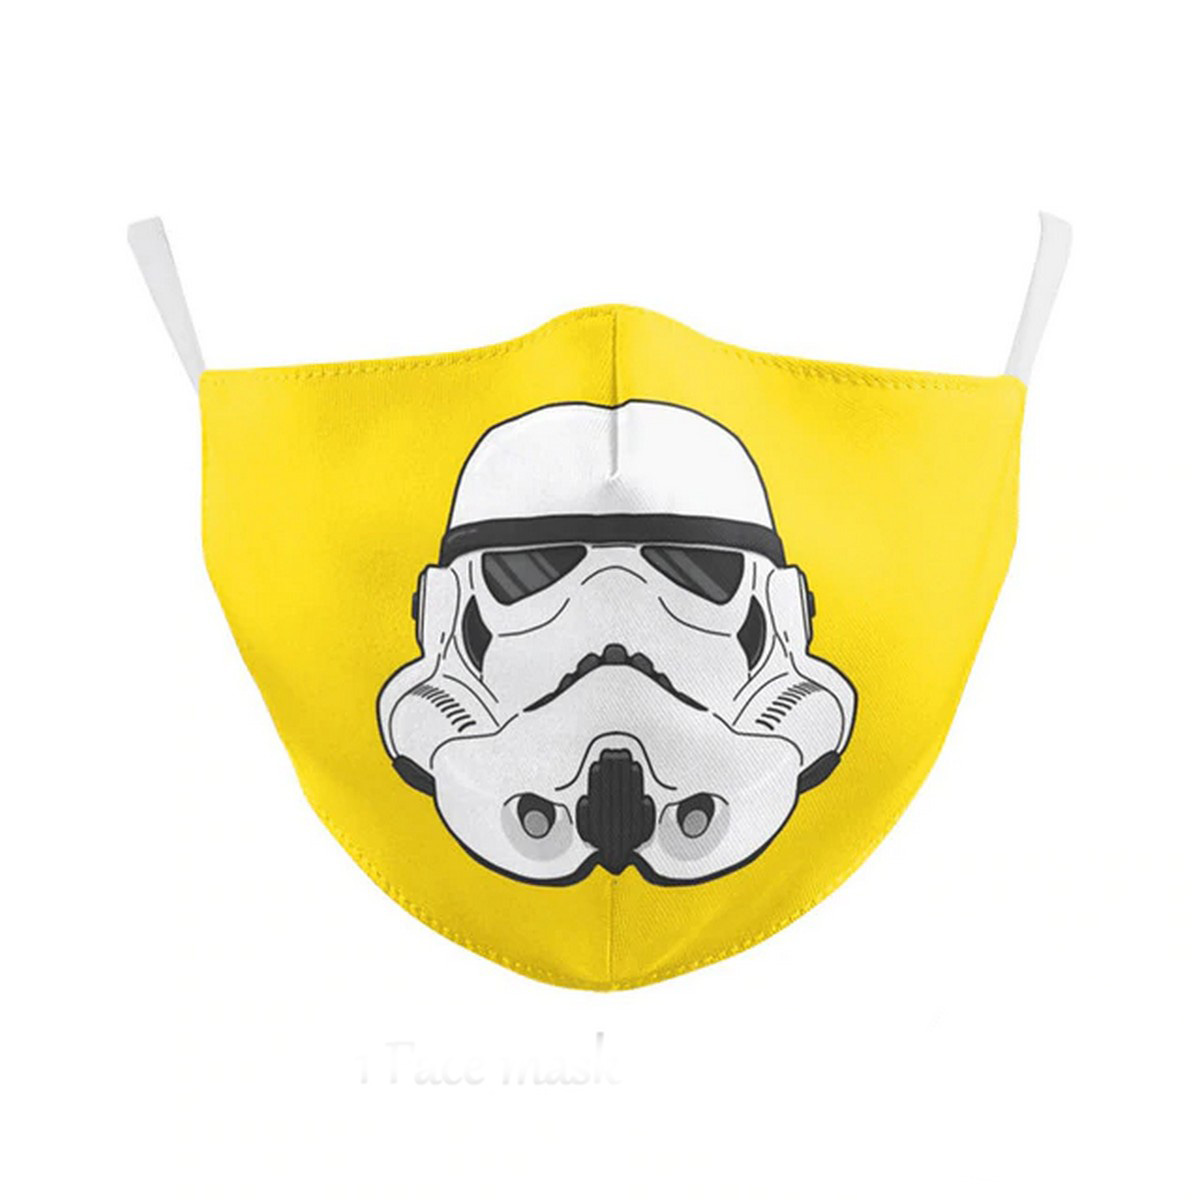 IMPERIAL Star wars face mask